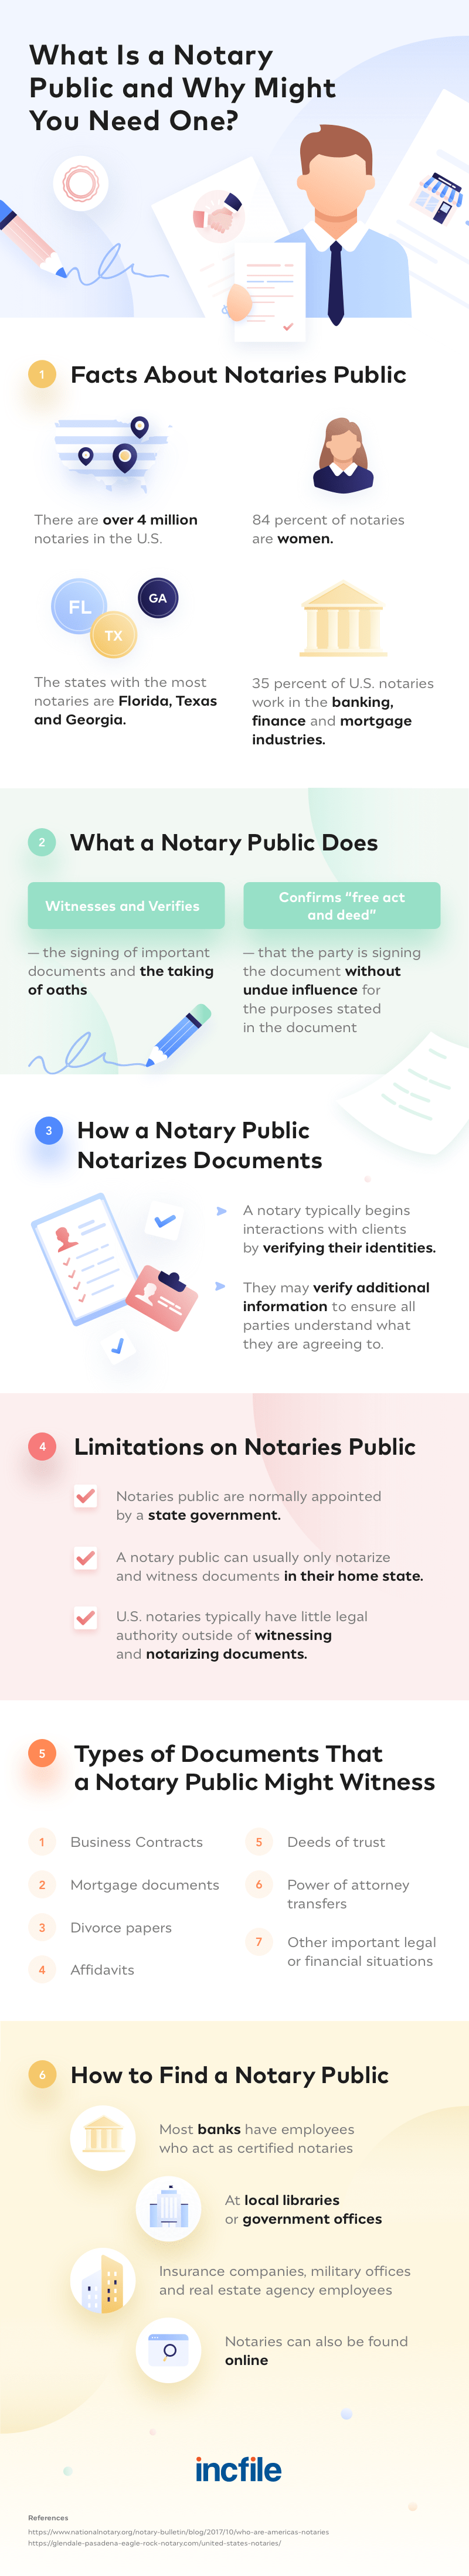 what is a notary public and what do they do